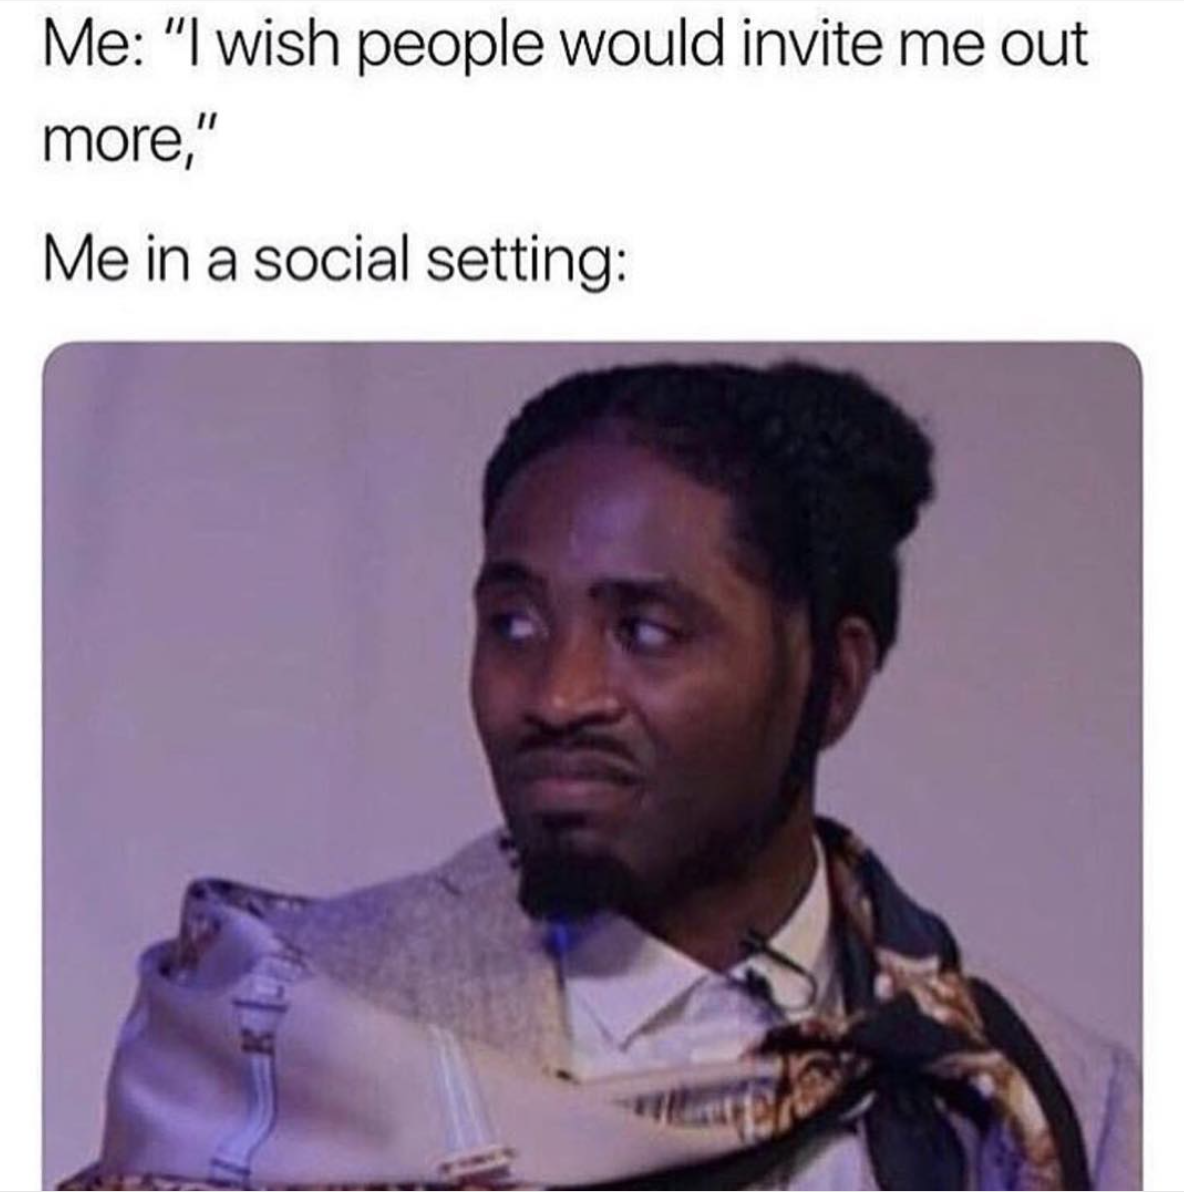 invite me out meme - Me "I wish people would invite me out more," Me in a social setting